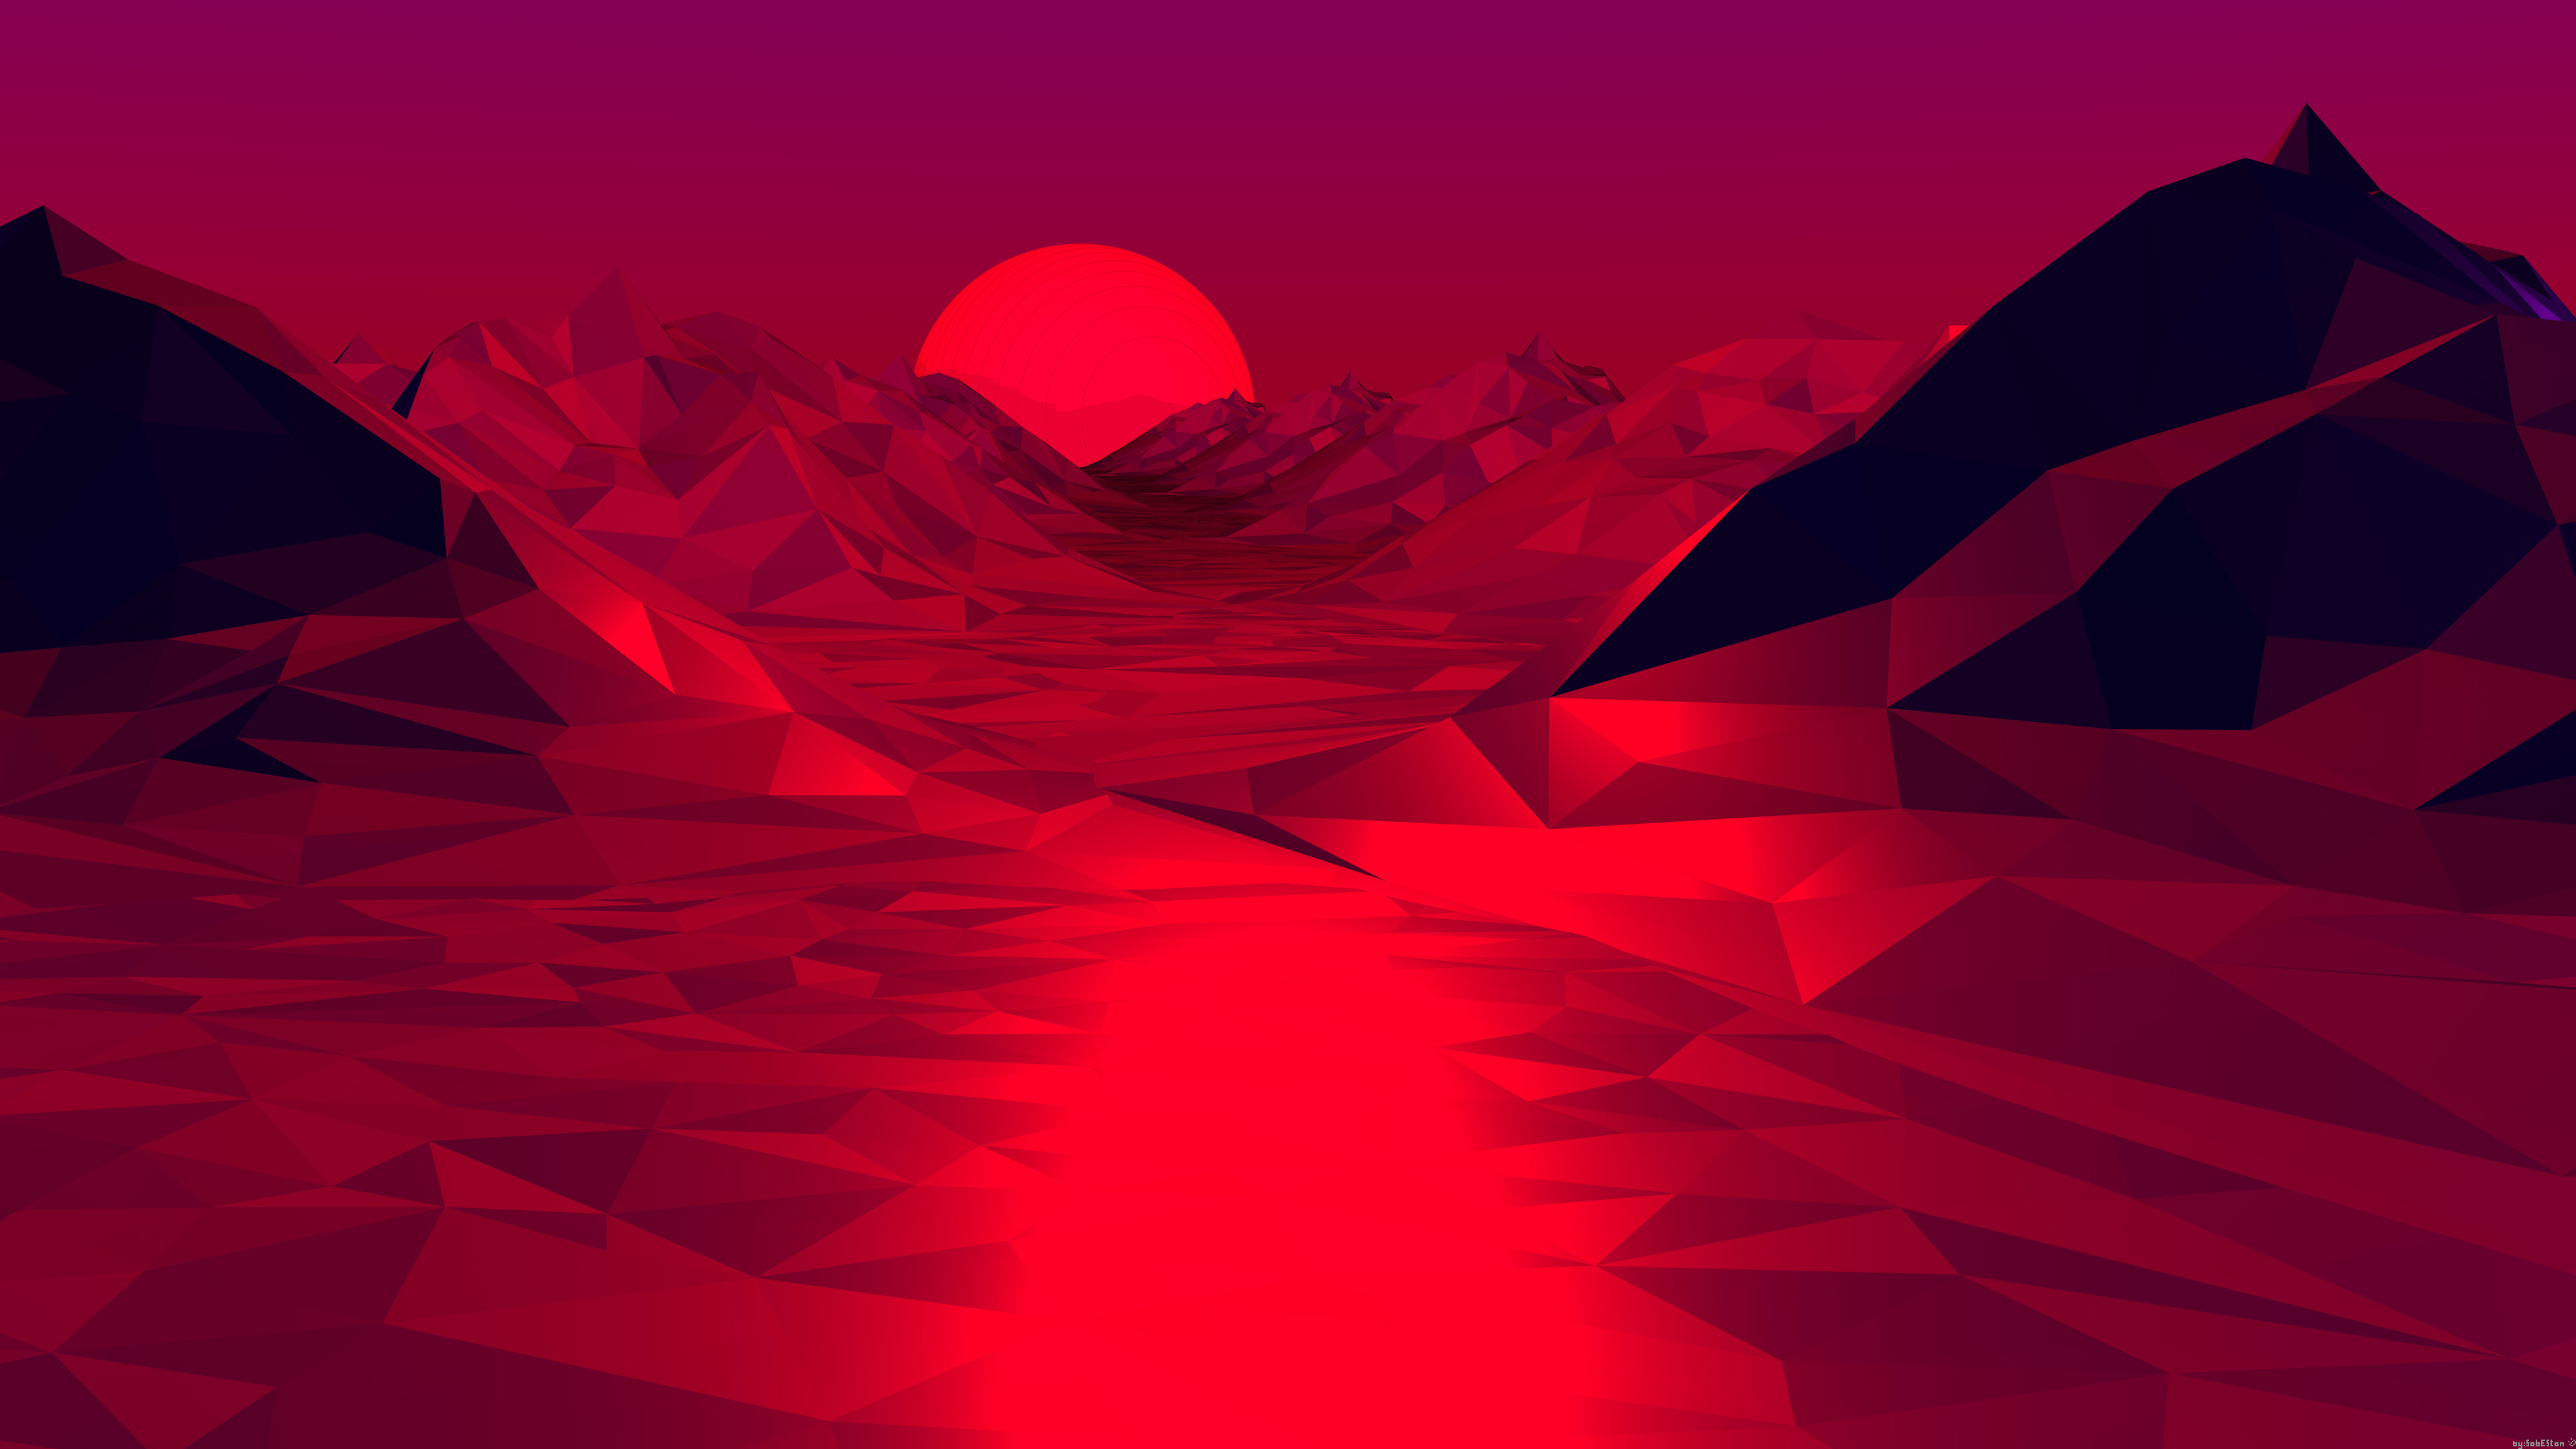 A red sunset over mountains and water - 3D